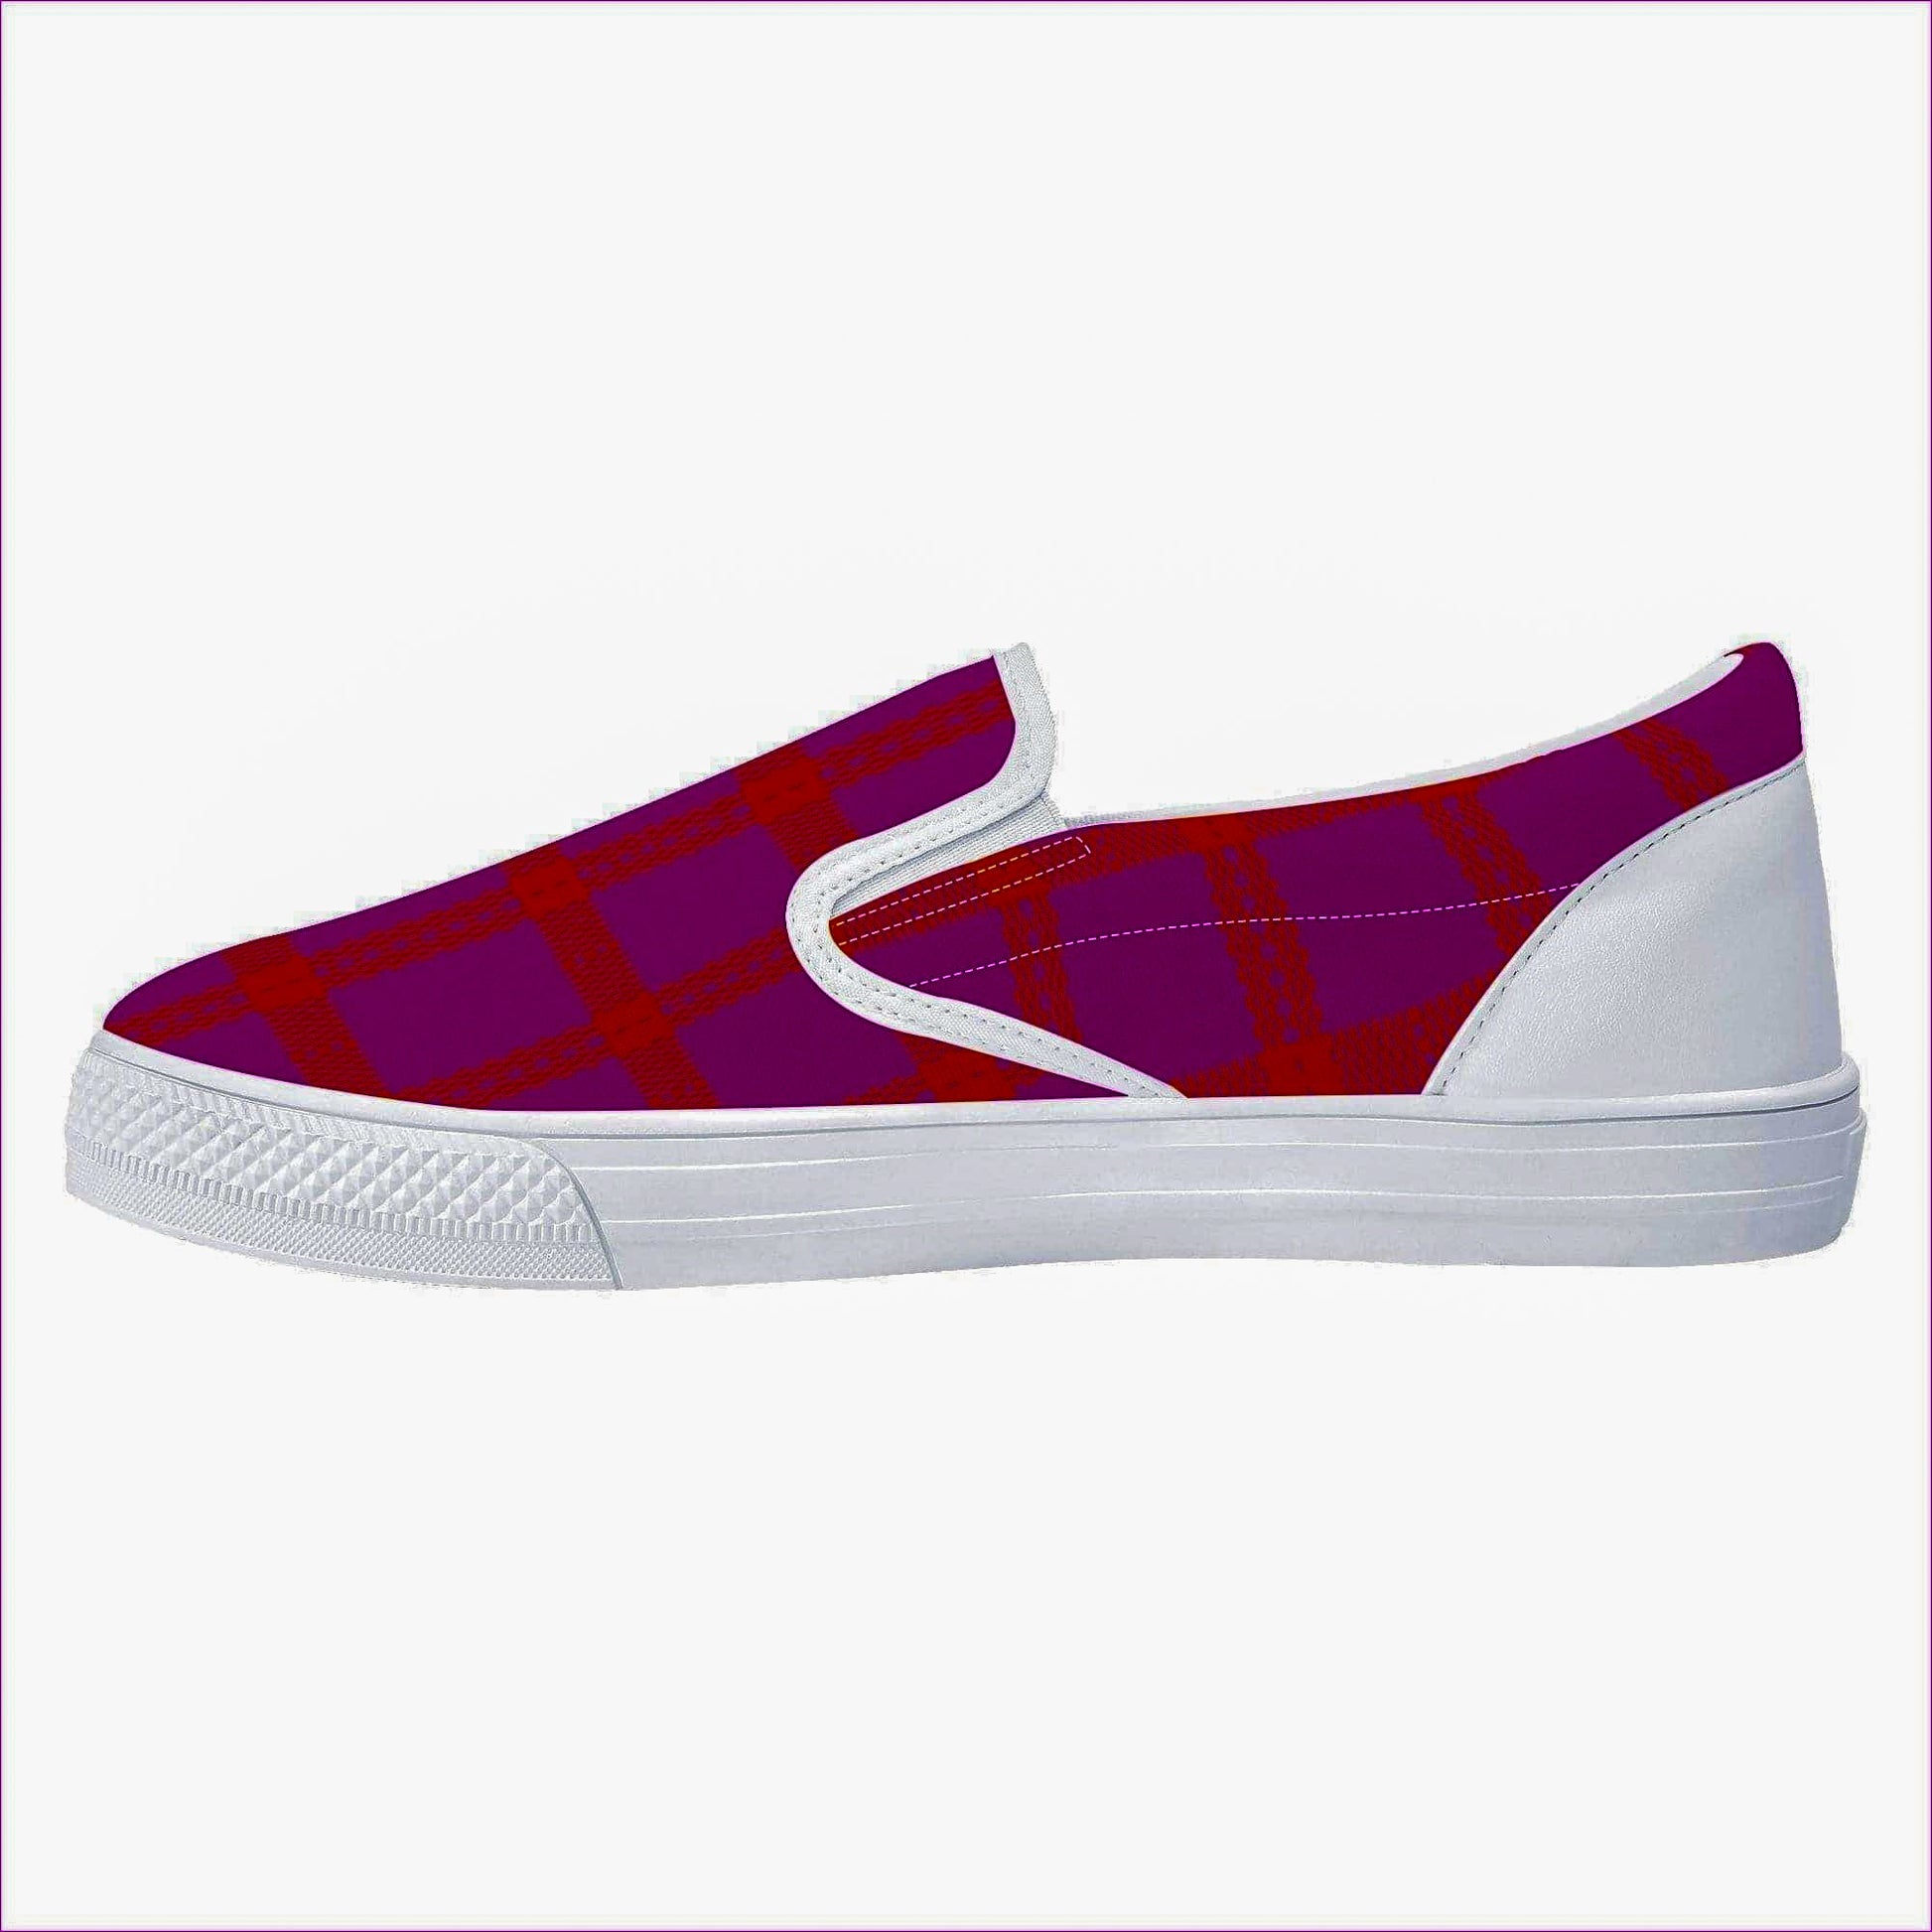 Perfusion Plaid Slip-on Shoes - women's shoe at TFC&H Co.